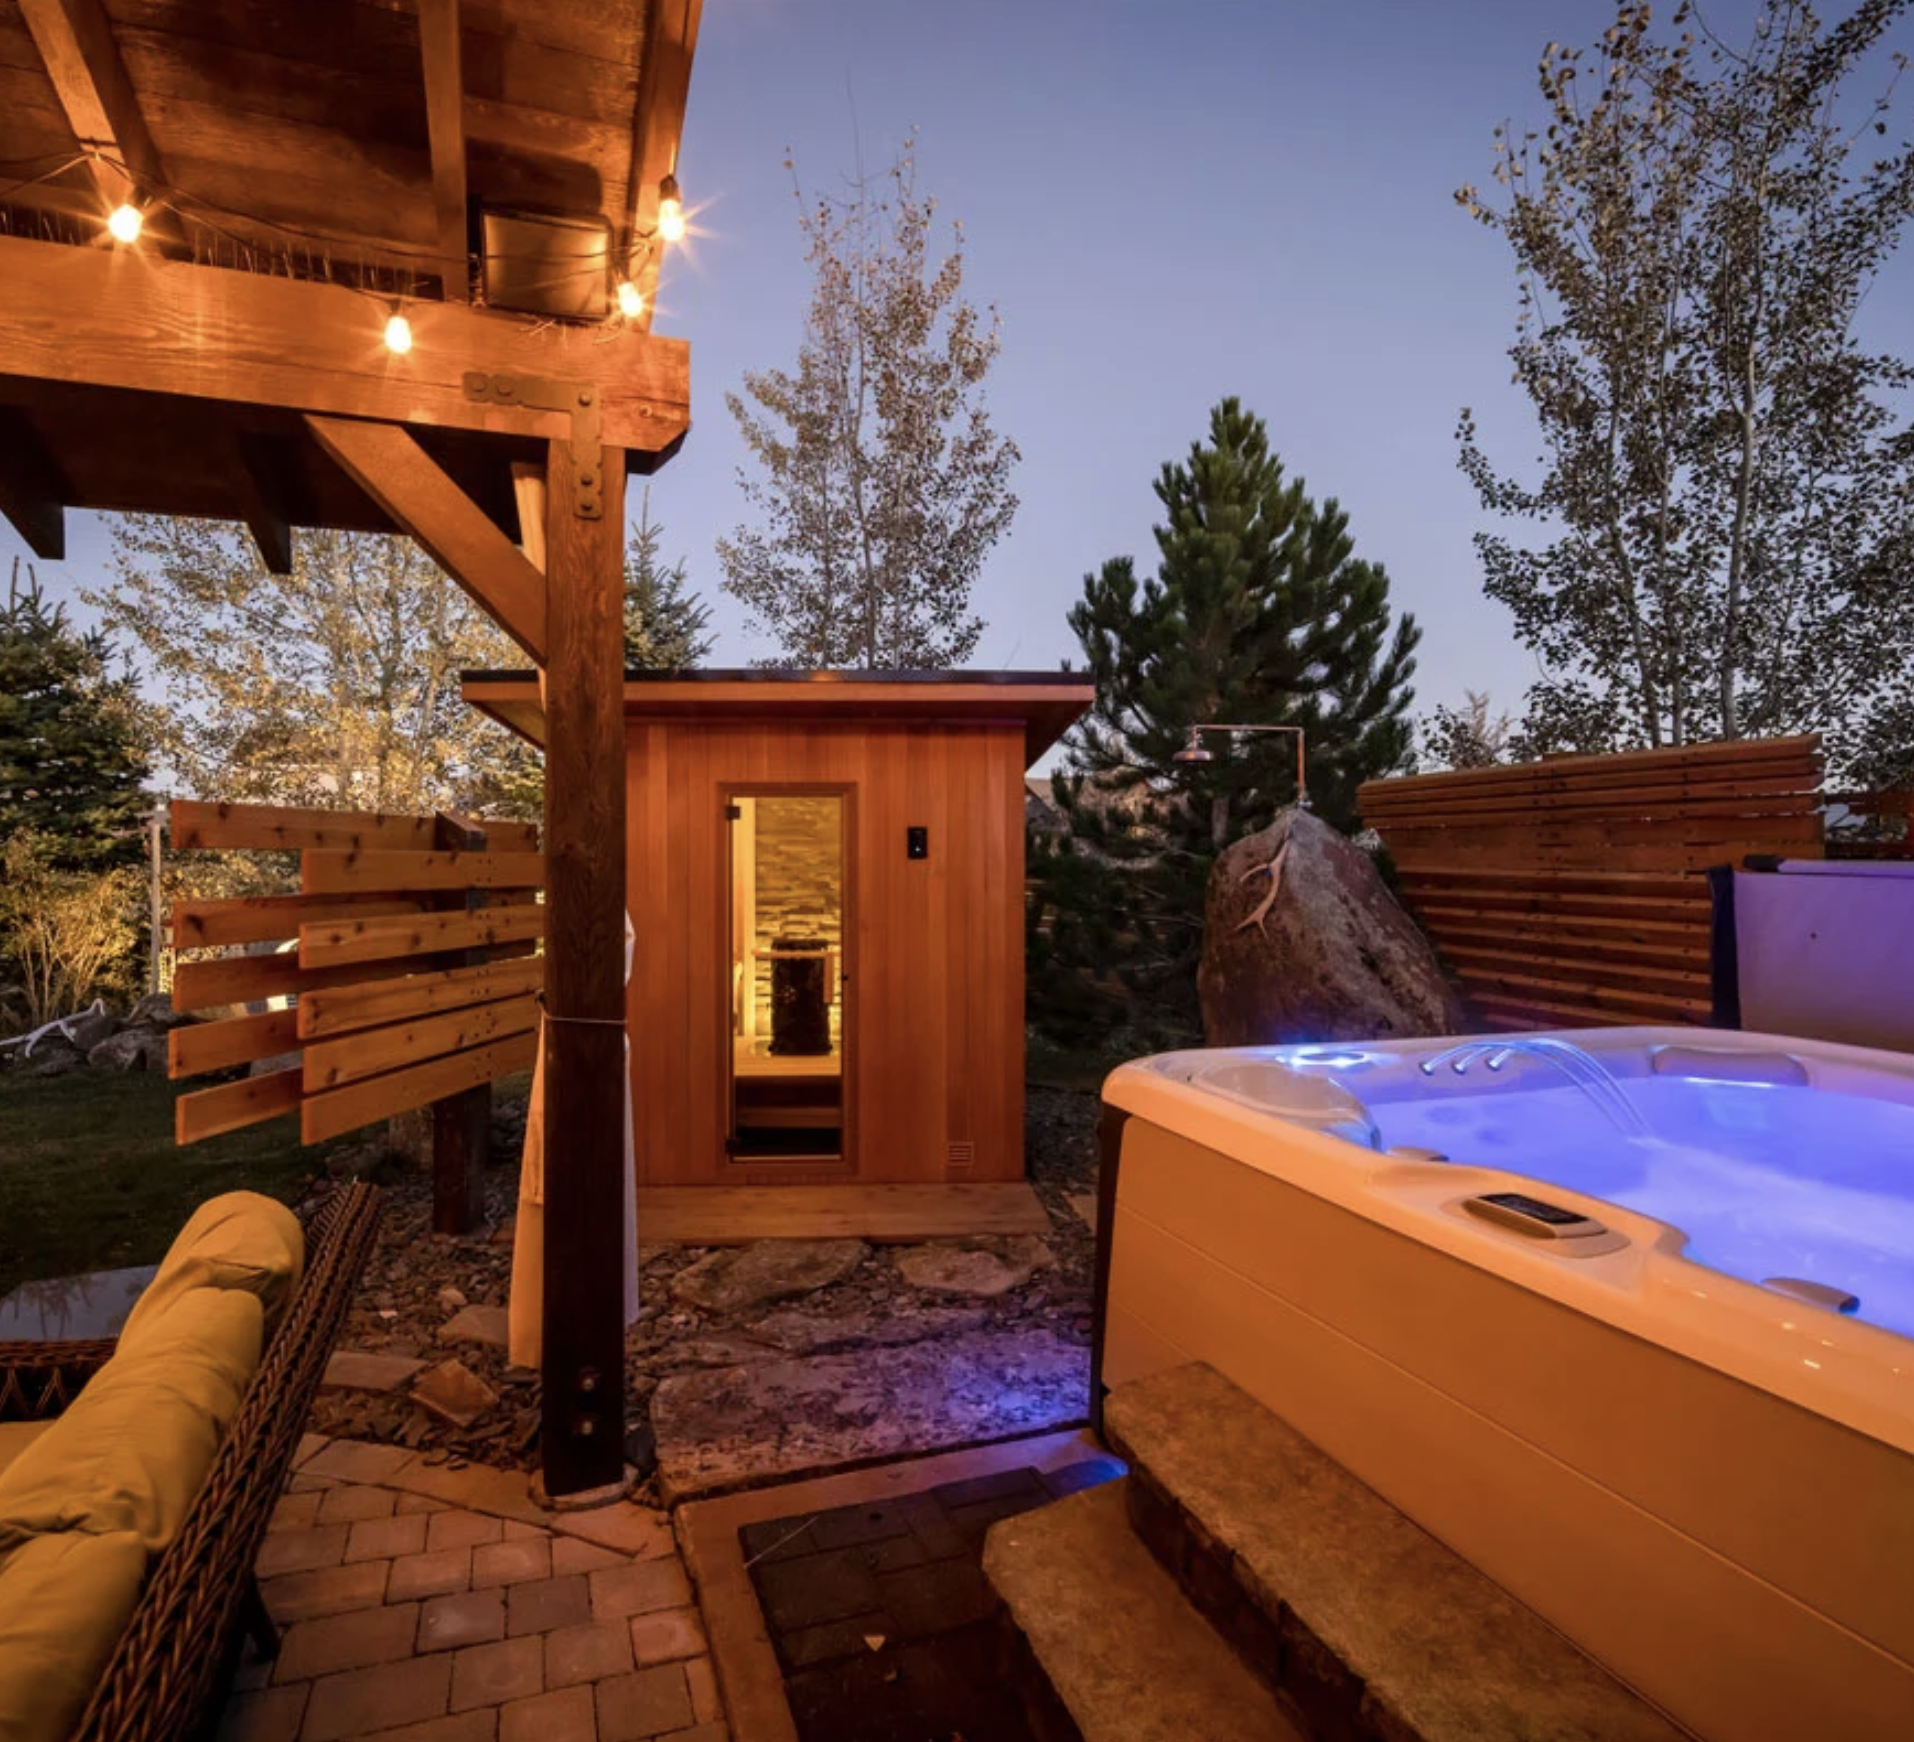 How to Choose an Outdoor Infrared Sauna for Your Home